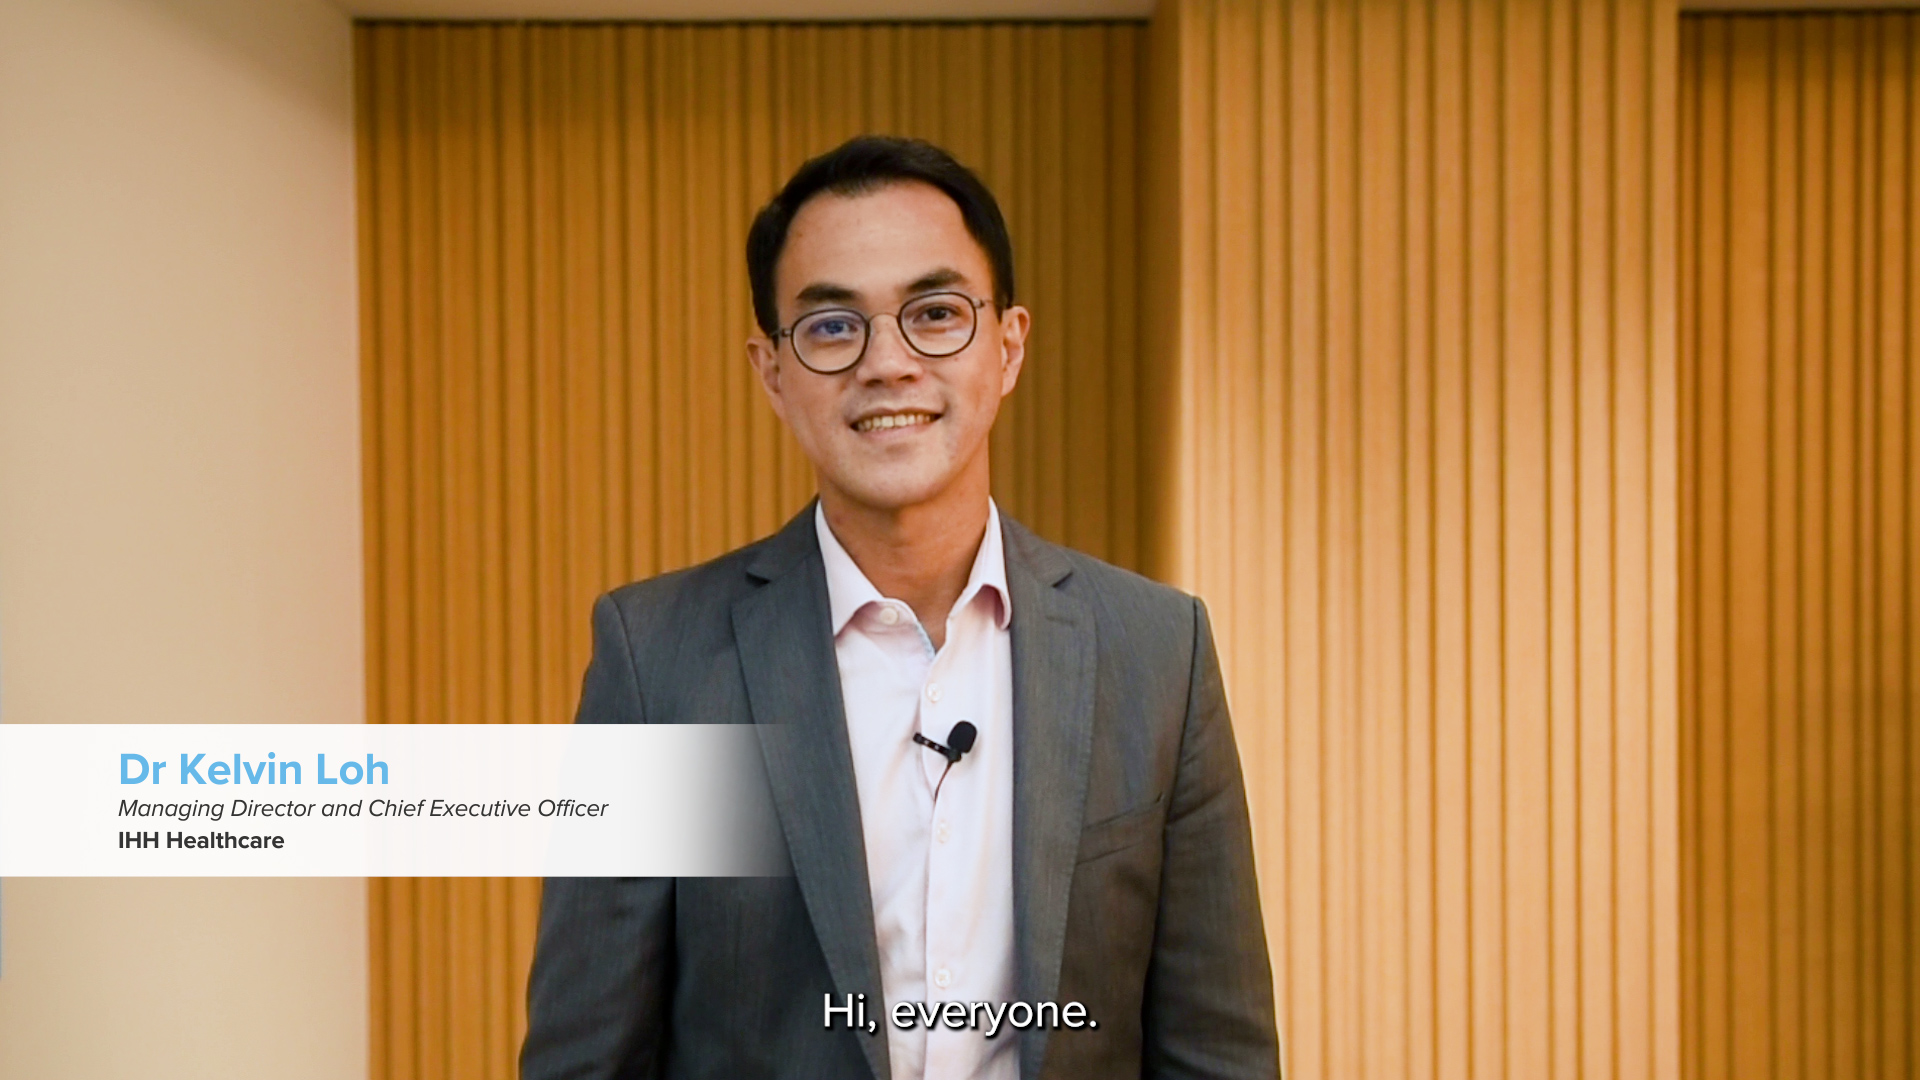 Dr Kelvin Loh, Managing Director and Chief Executive Officer, shares what Care. For Good. means to IHH.